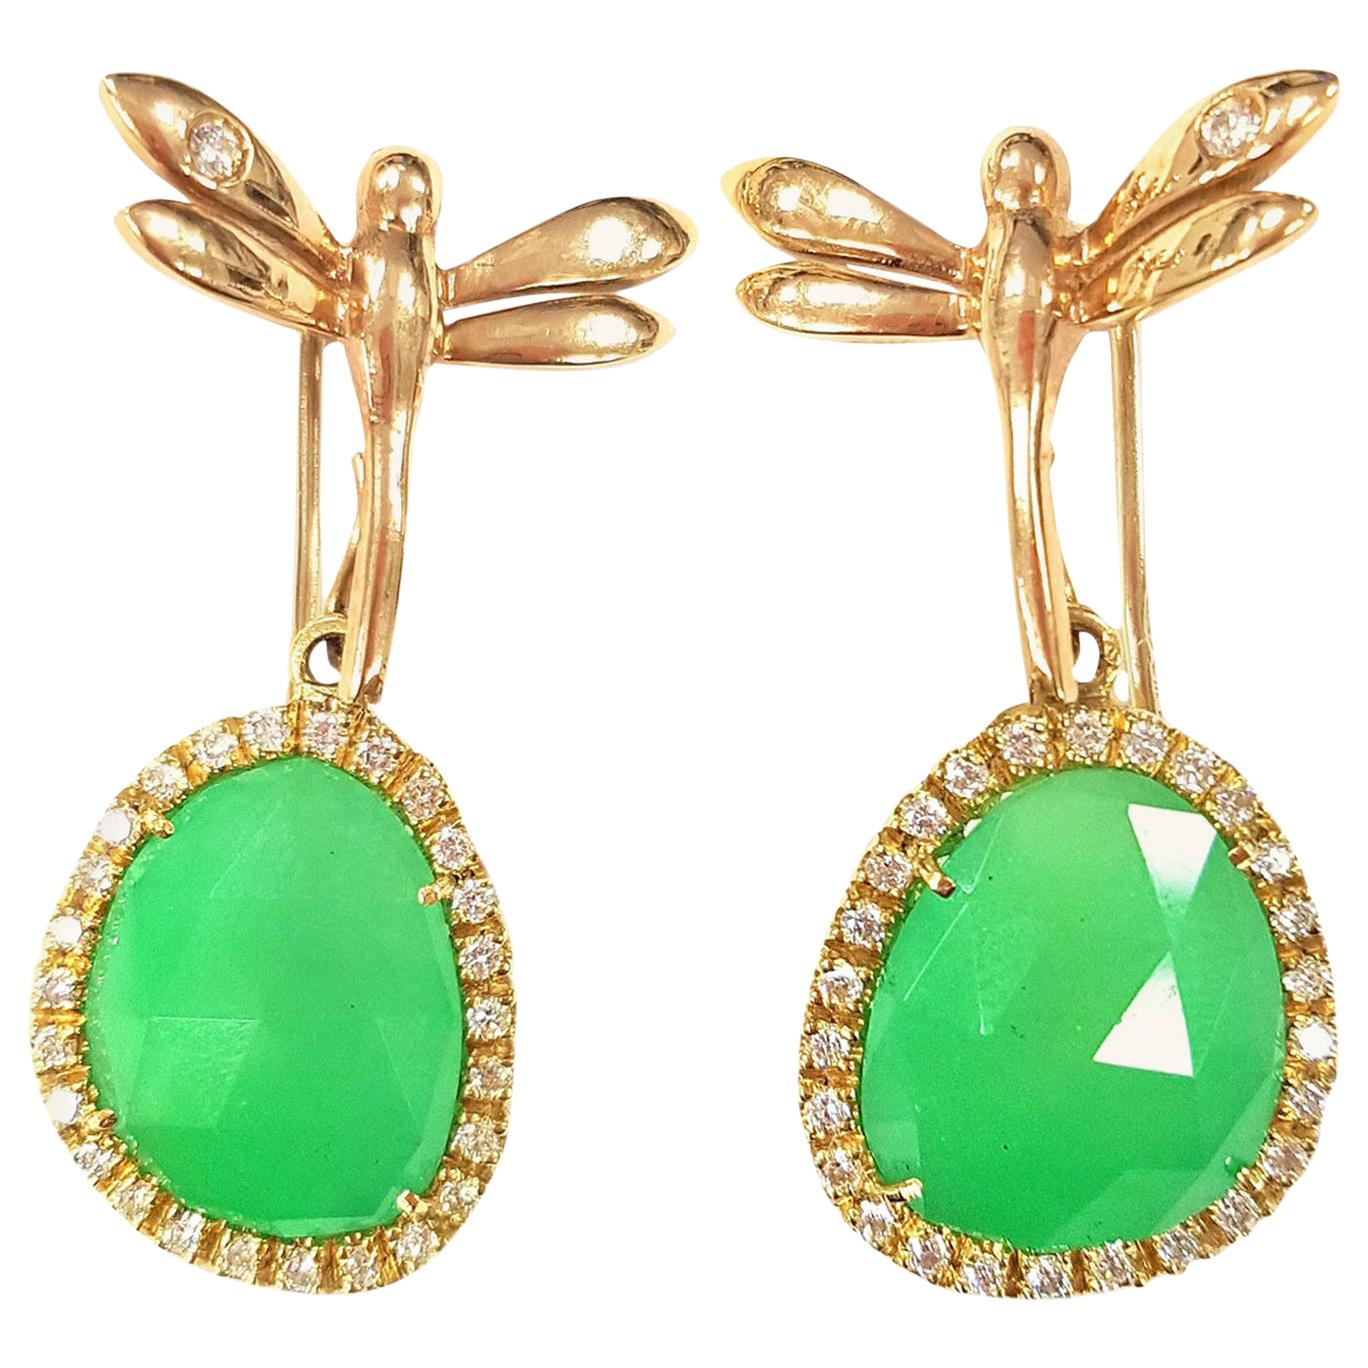 Contemporary 18 Karat Gold Convertible Bright Jade Earrings with Dragonfly